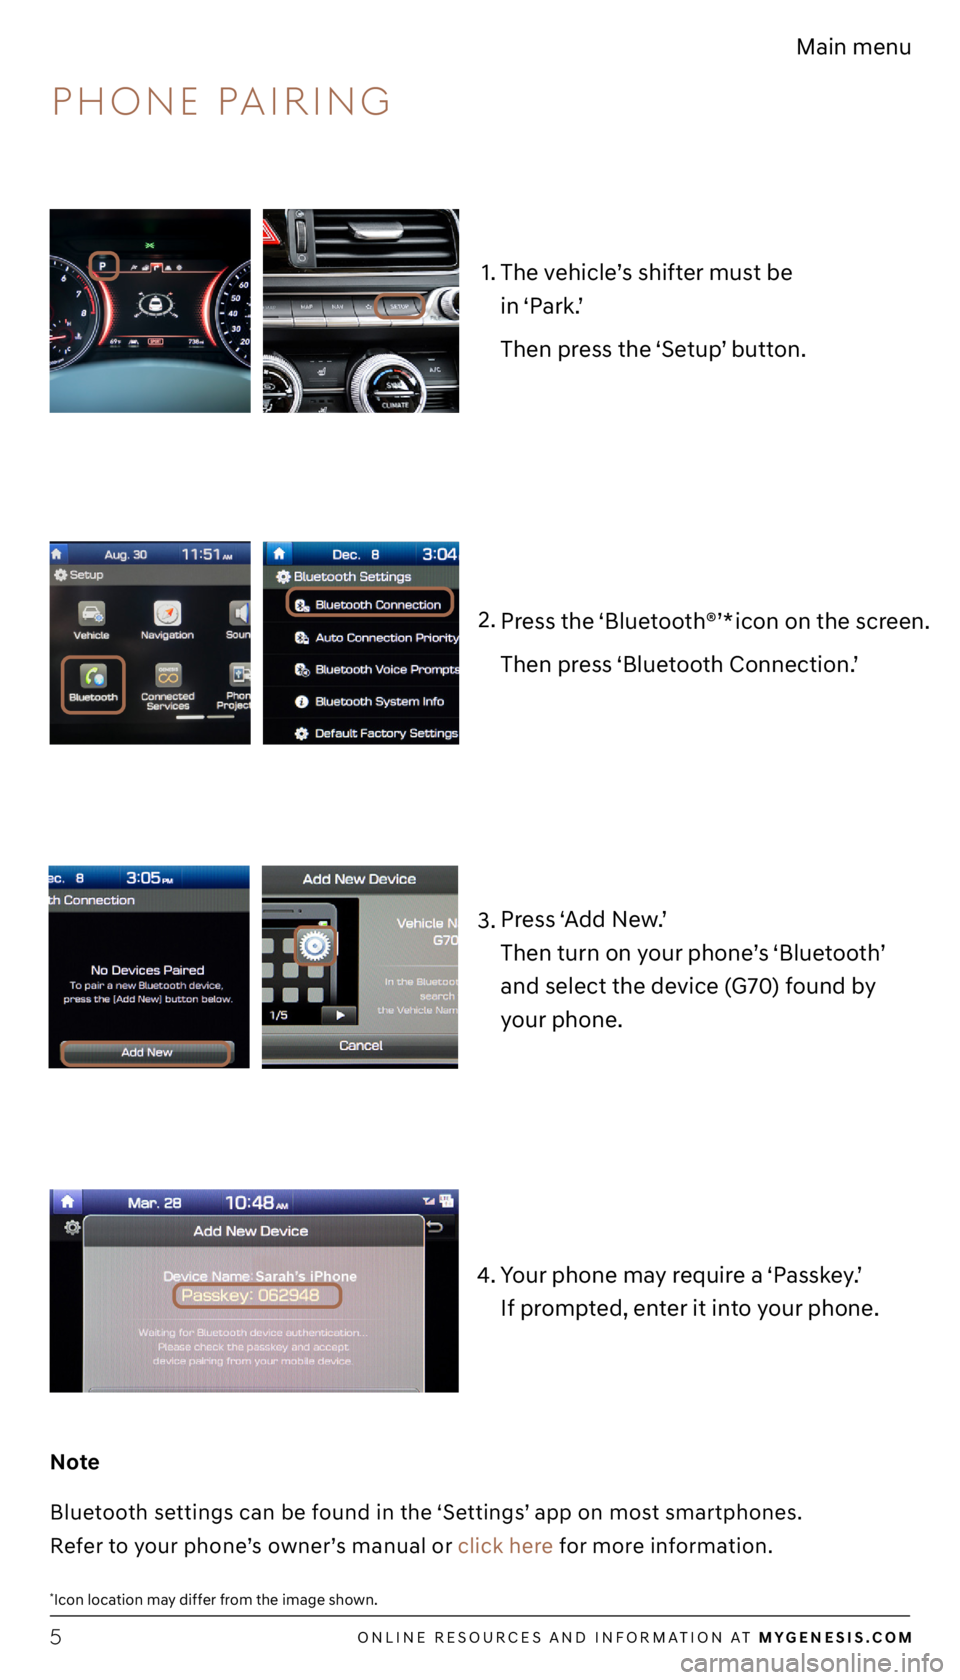 GENESIS G70 2021  Getting Started Guide ONLINE RESOURCES AND INFORMATION AT MYGENESIS.COM5
Main menu
1.
3. 2.
Note
Bluetooth settings can be found in the ‘Settings’ app on most smartphones.   
Refer to your phone’s owner’s manual or